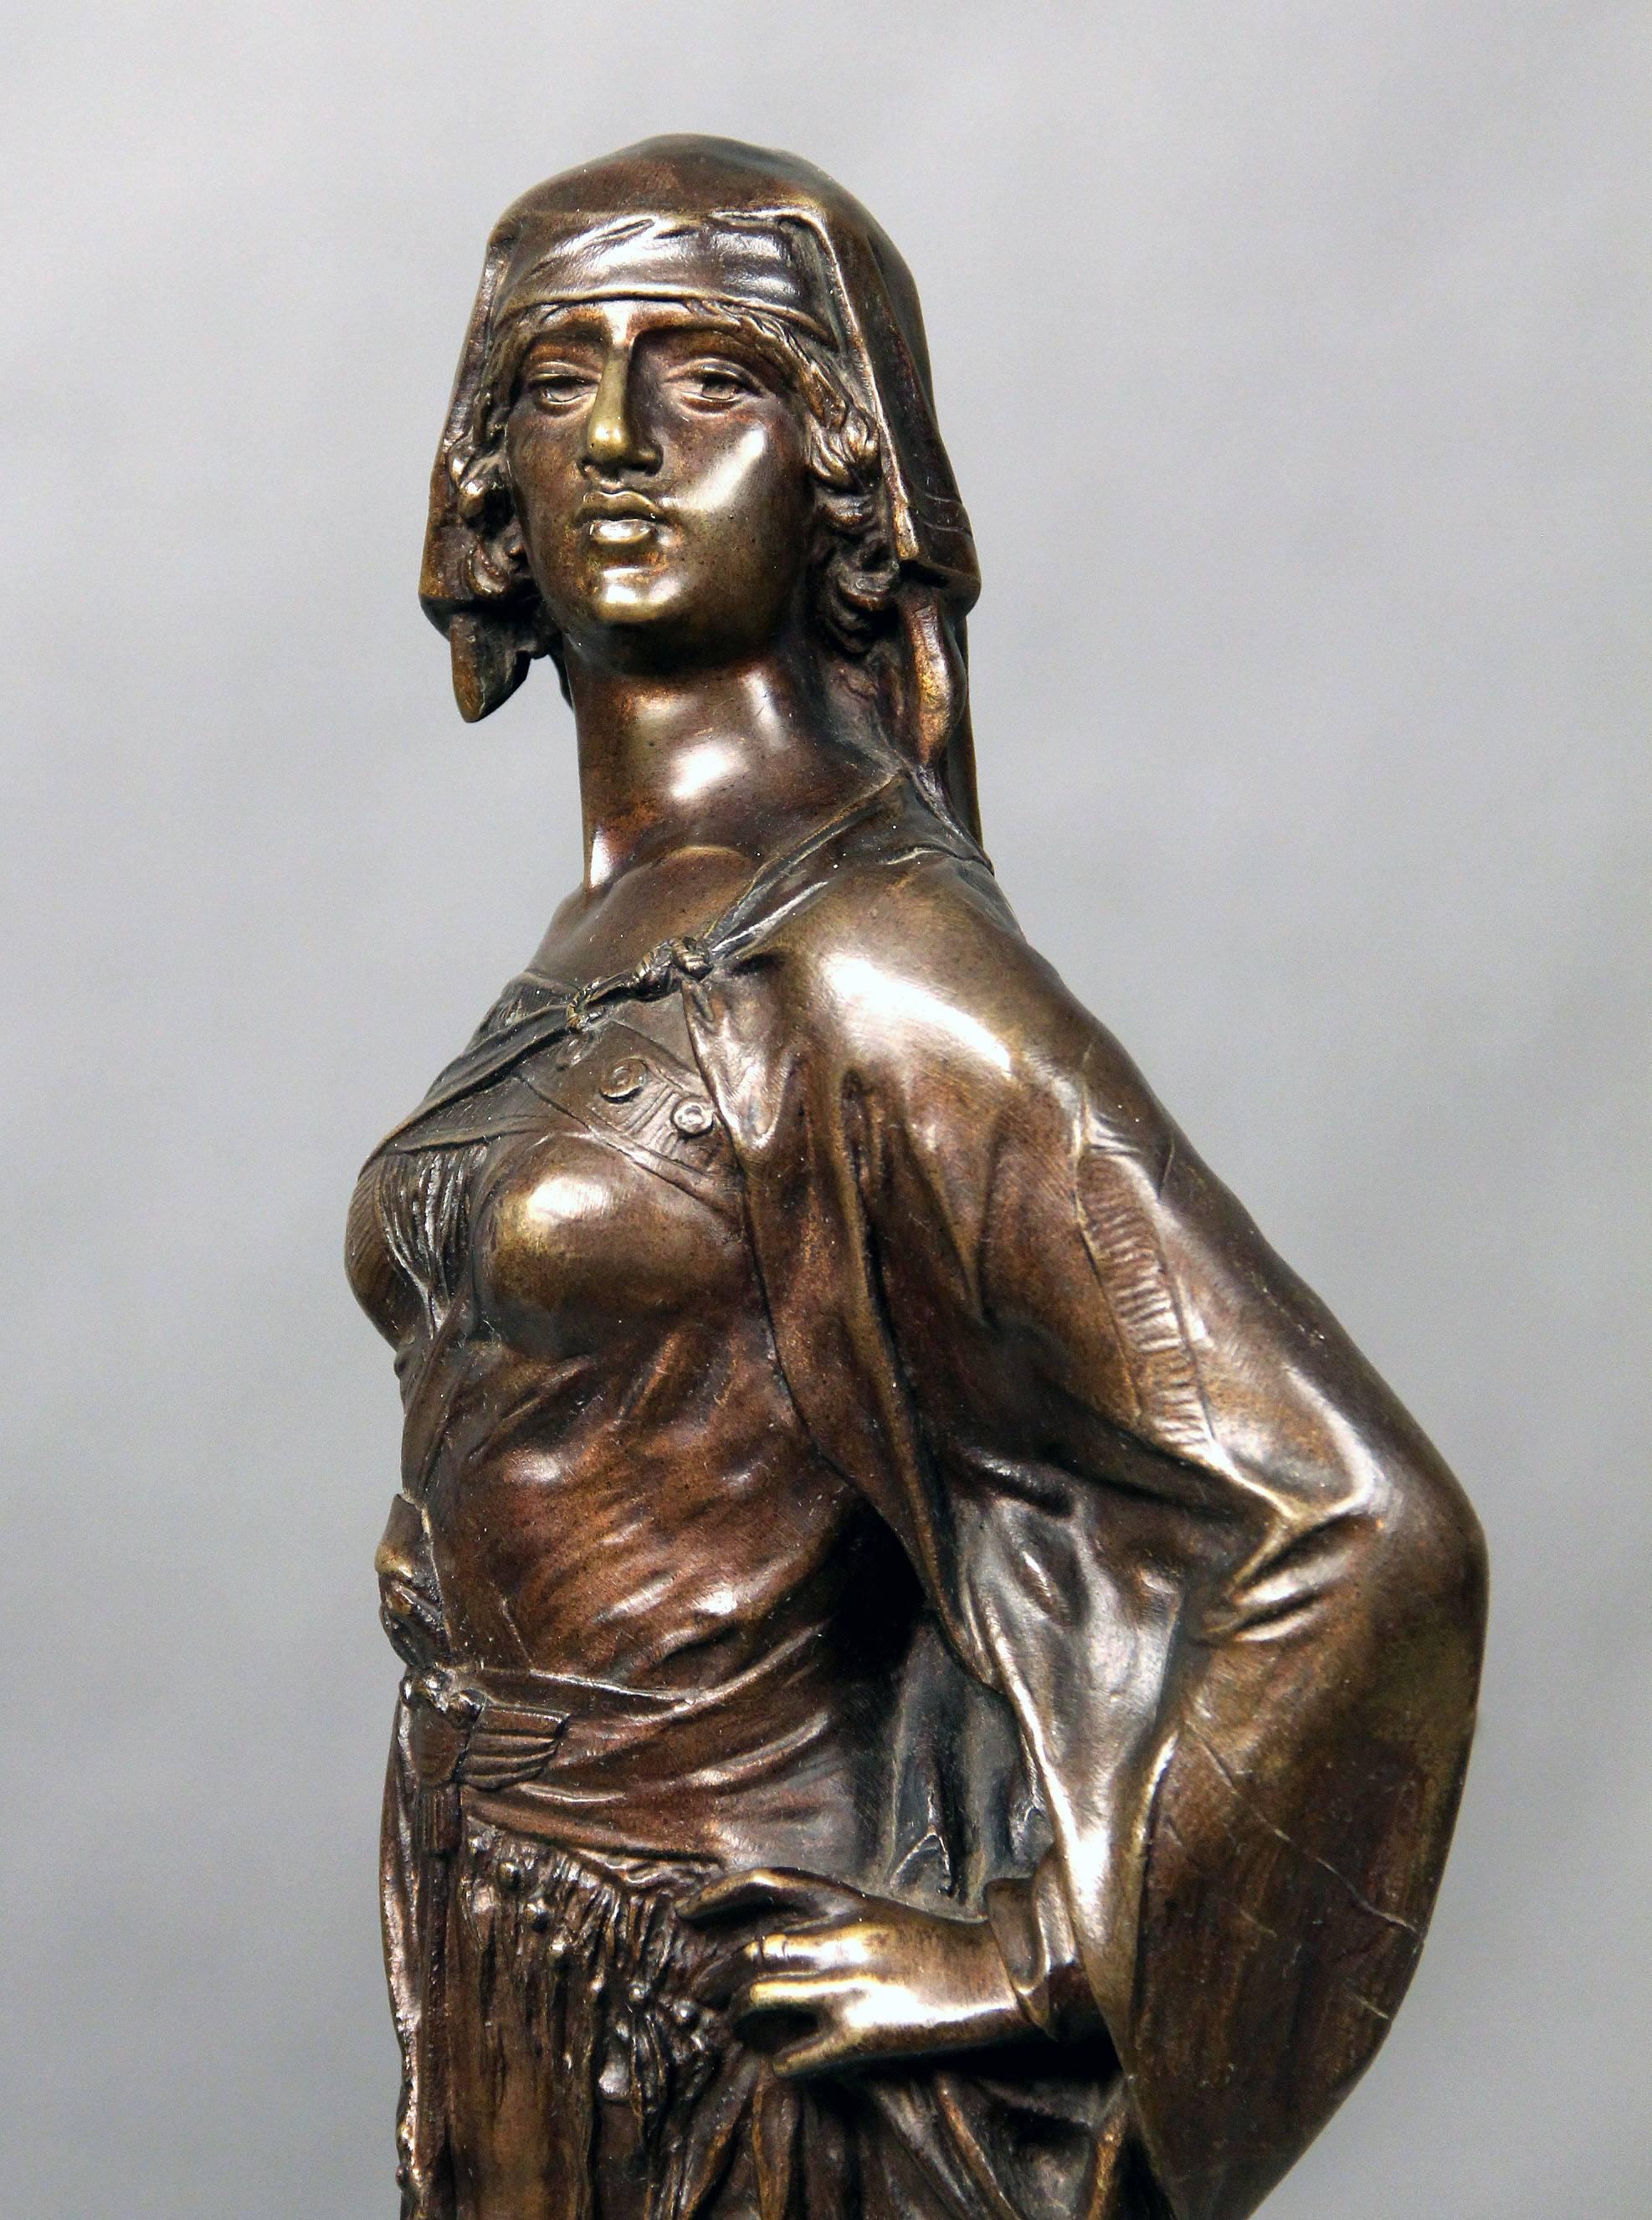 Late 19th century bronze sculpture of a female warrior with sword

Signed E Drouot

Edouard Drouot was born in Sommevoire in the Haut Marne region on 3rd April 1859. Early in his career, Drouot was a successful painter, in addition to his